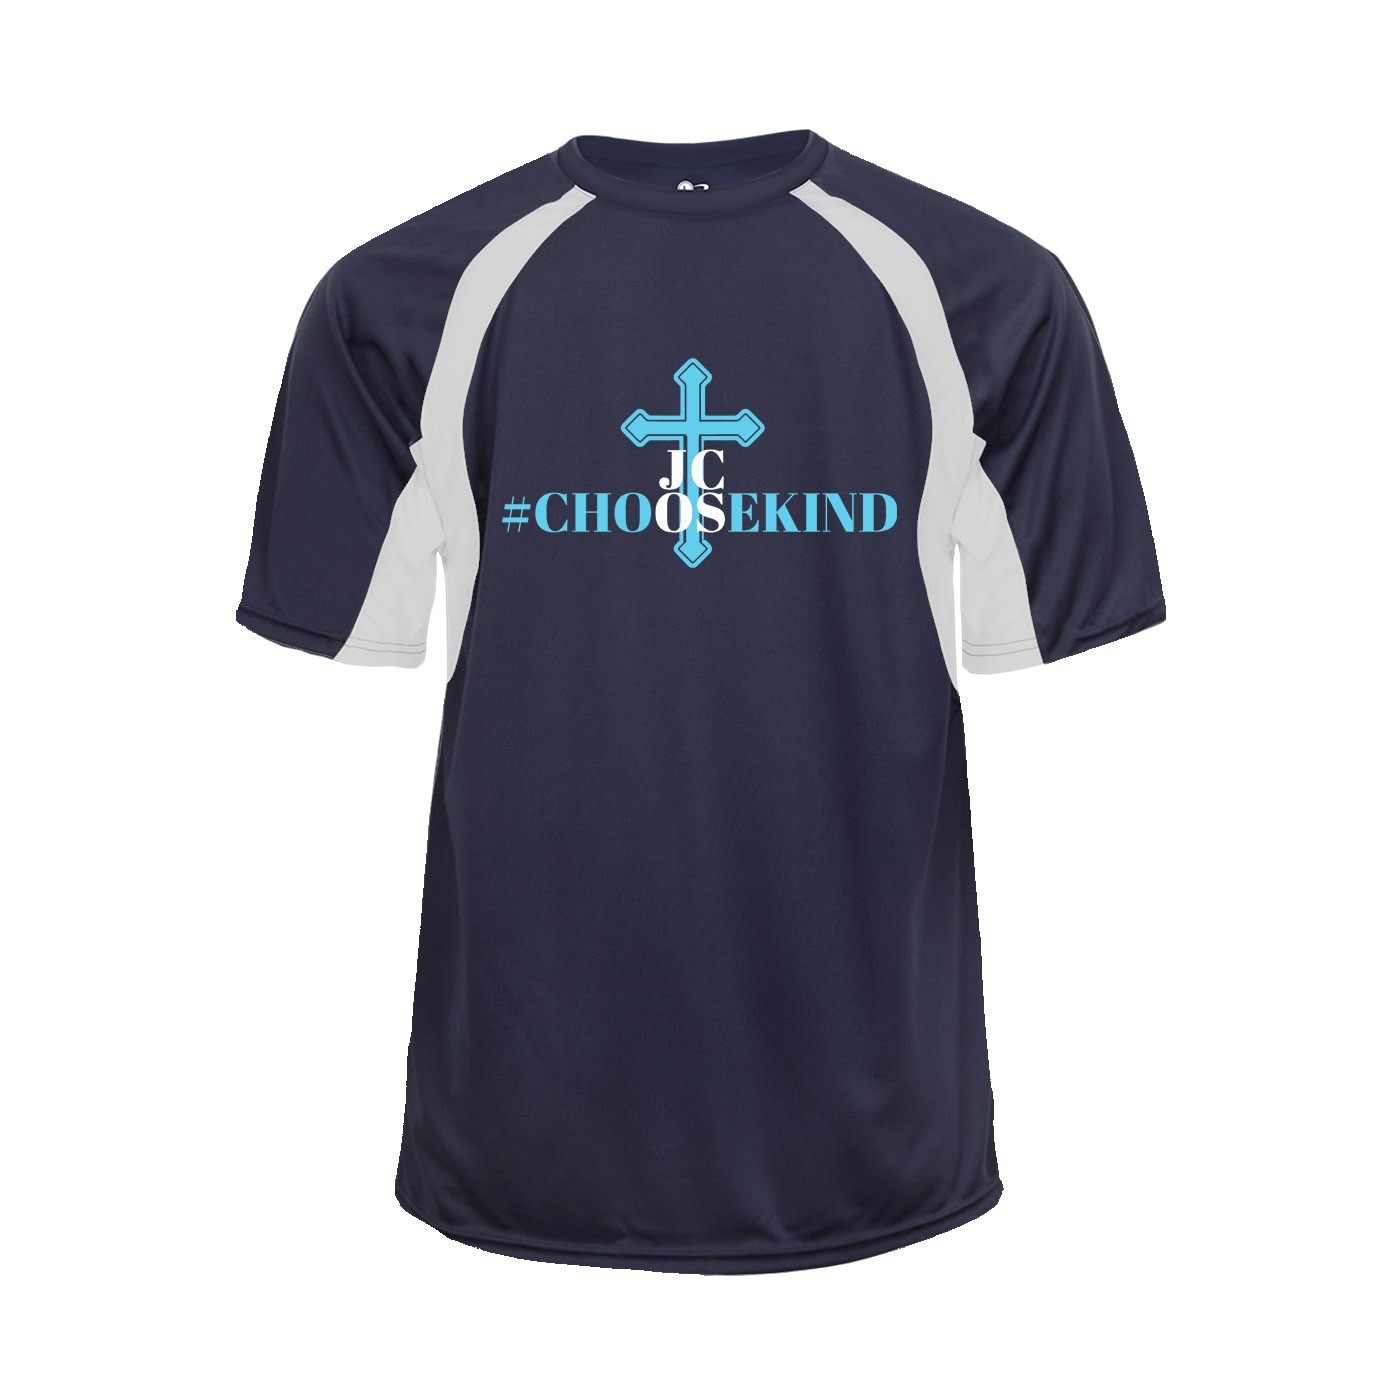 JCOS Staff Hook S/S T-Shirt w/ Choose Kind Logo #F35 - Please Allow 3-4 Weeks for Delivery